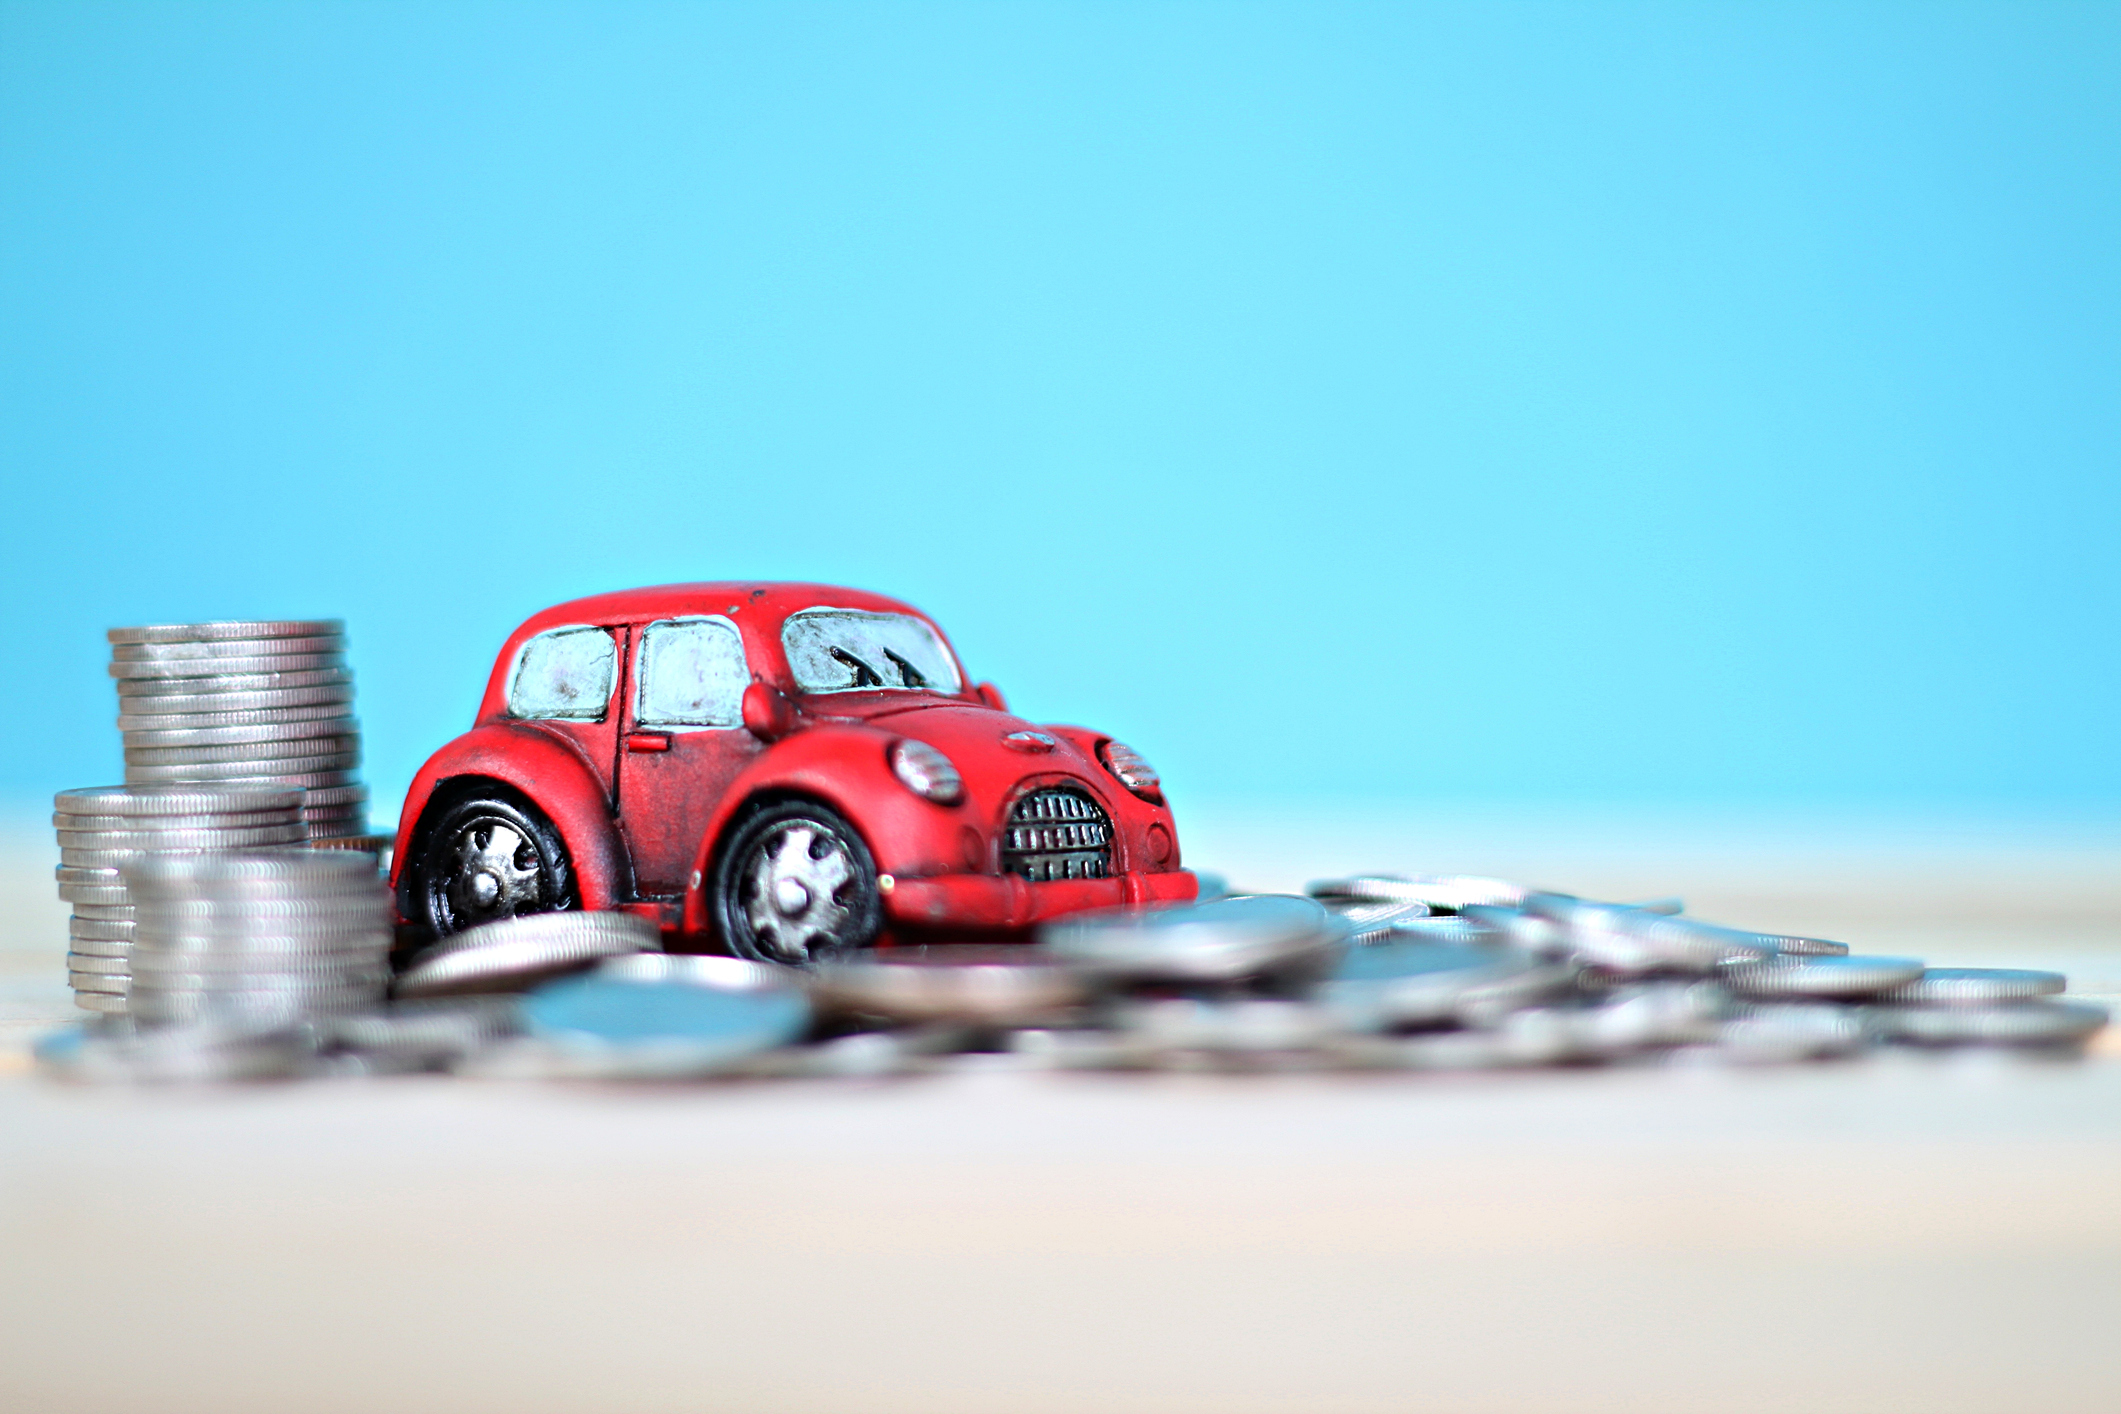 Image: Toy car driving over a pile of money.